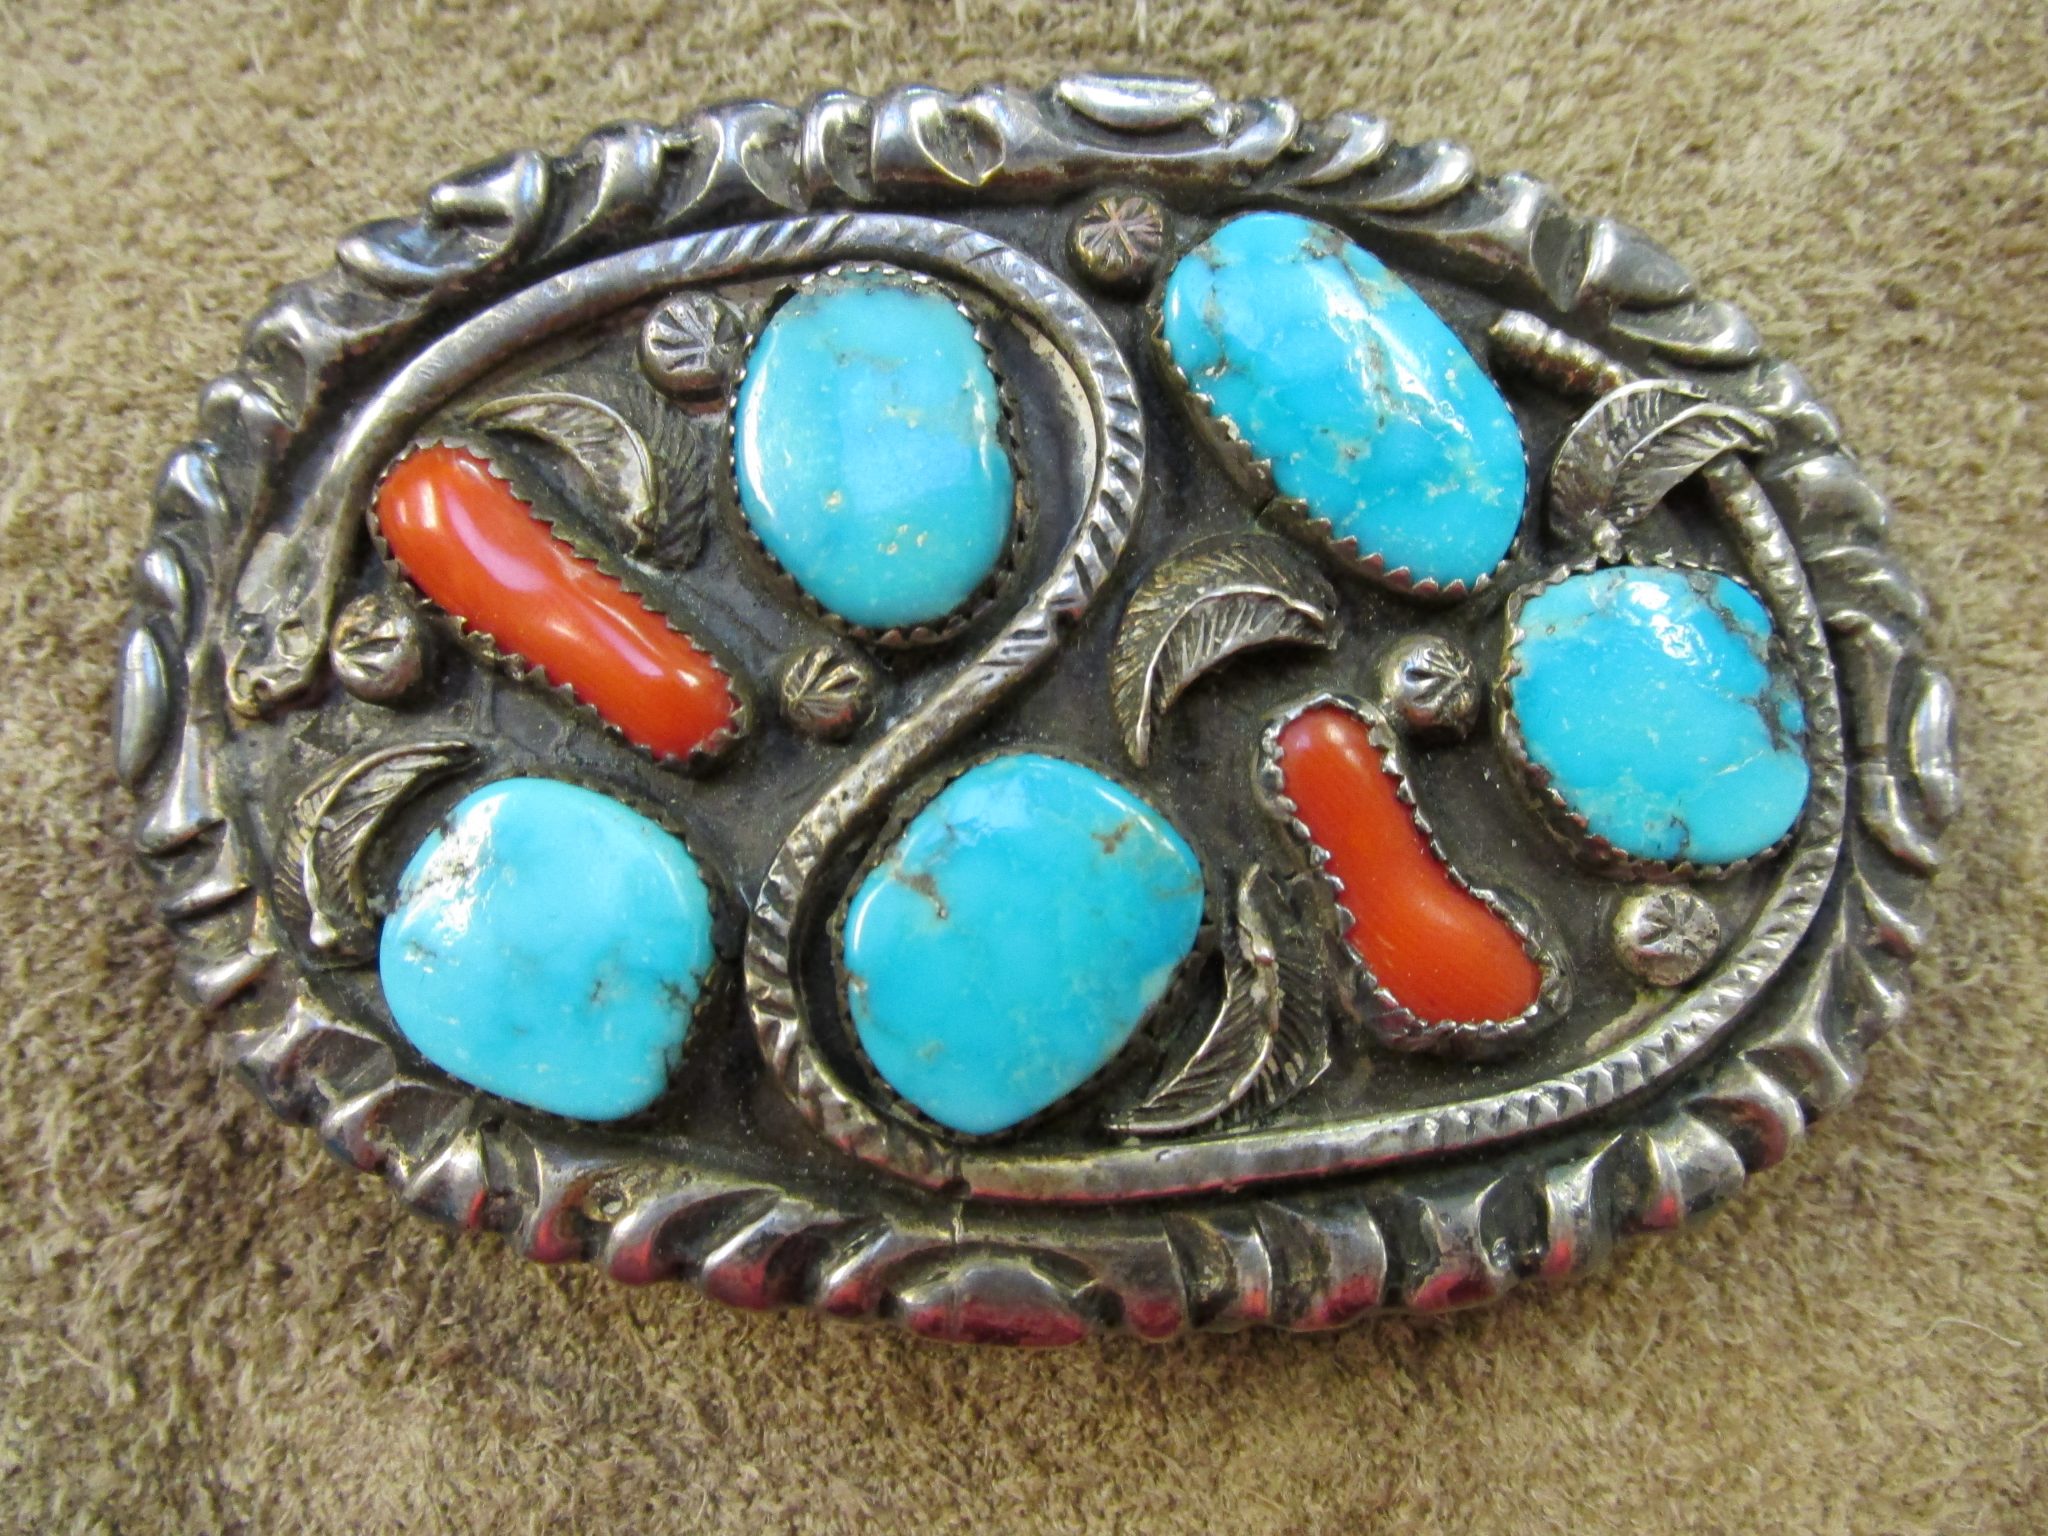 Turquoise and Coral Belt Buckle